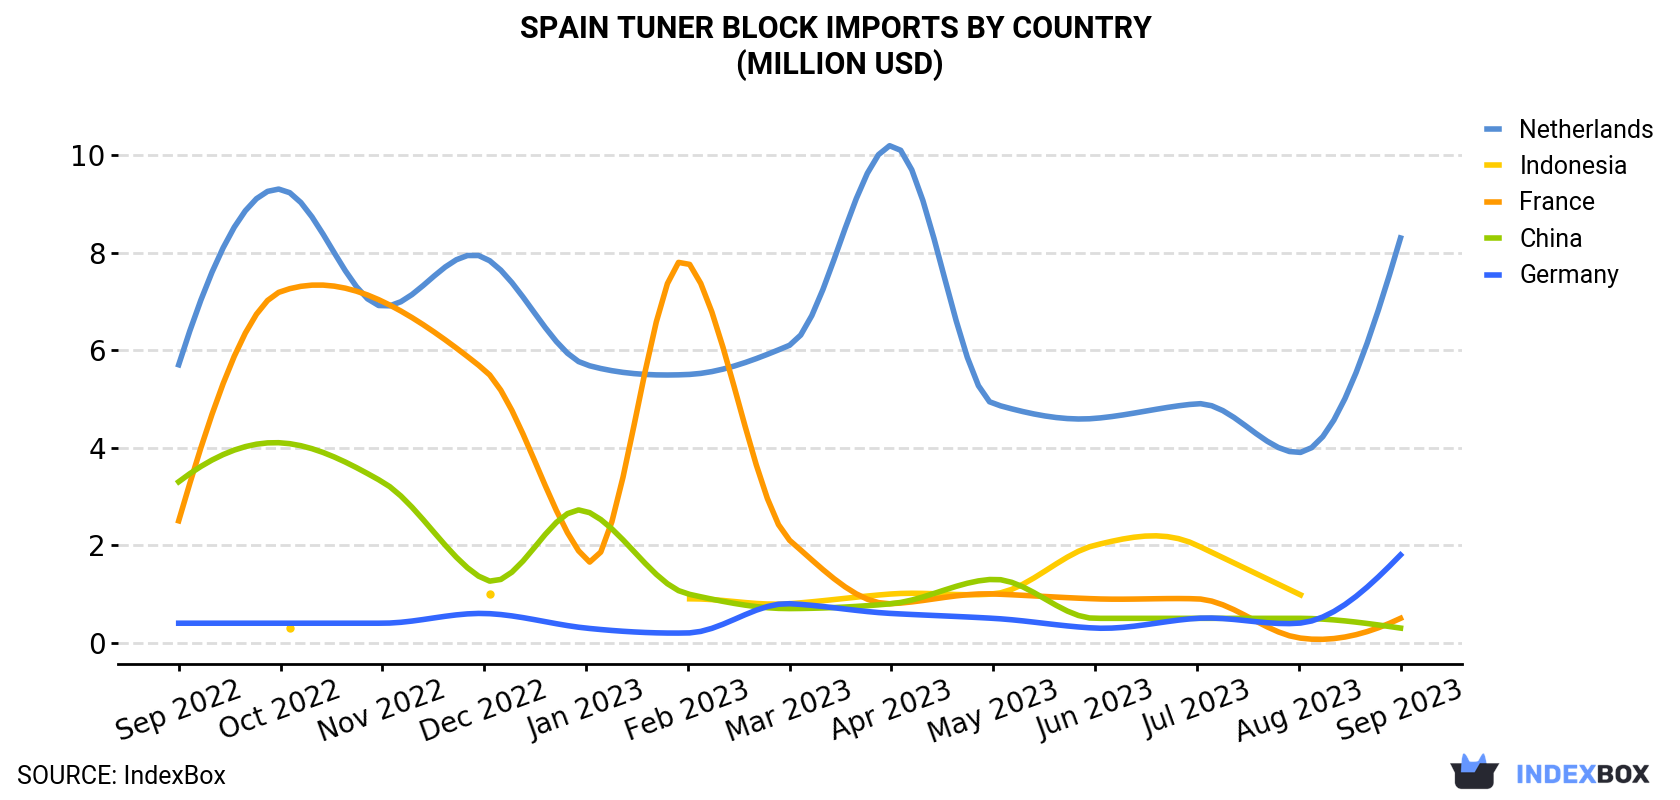 Spain Tuner Block Imports By Country (Million USD)